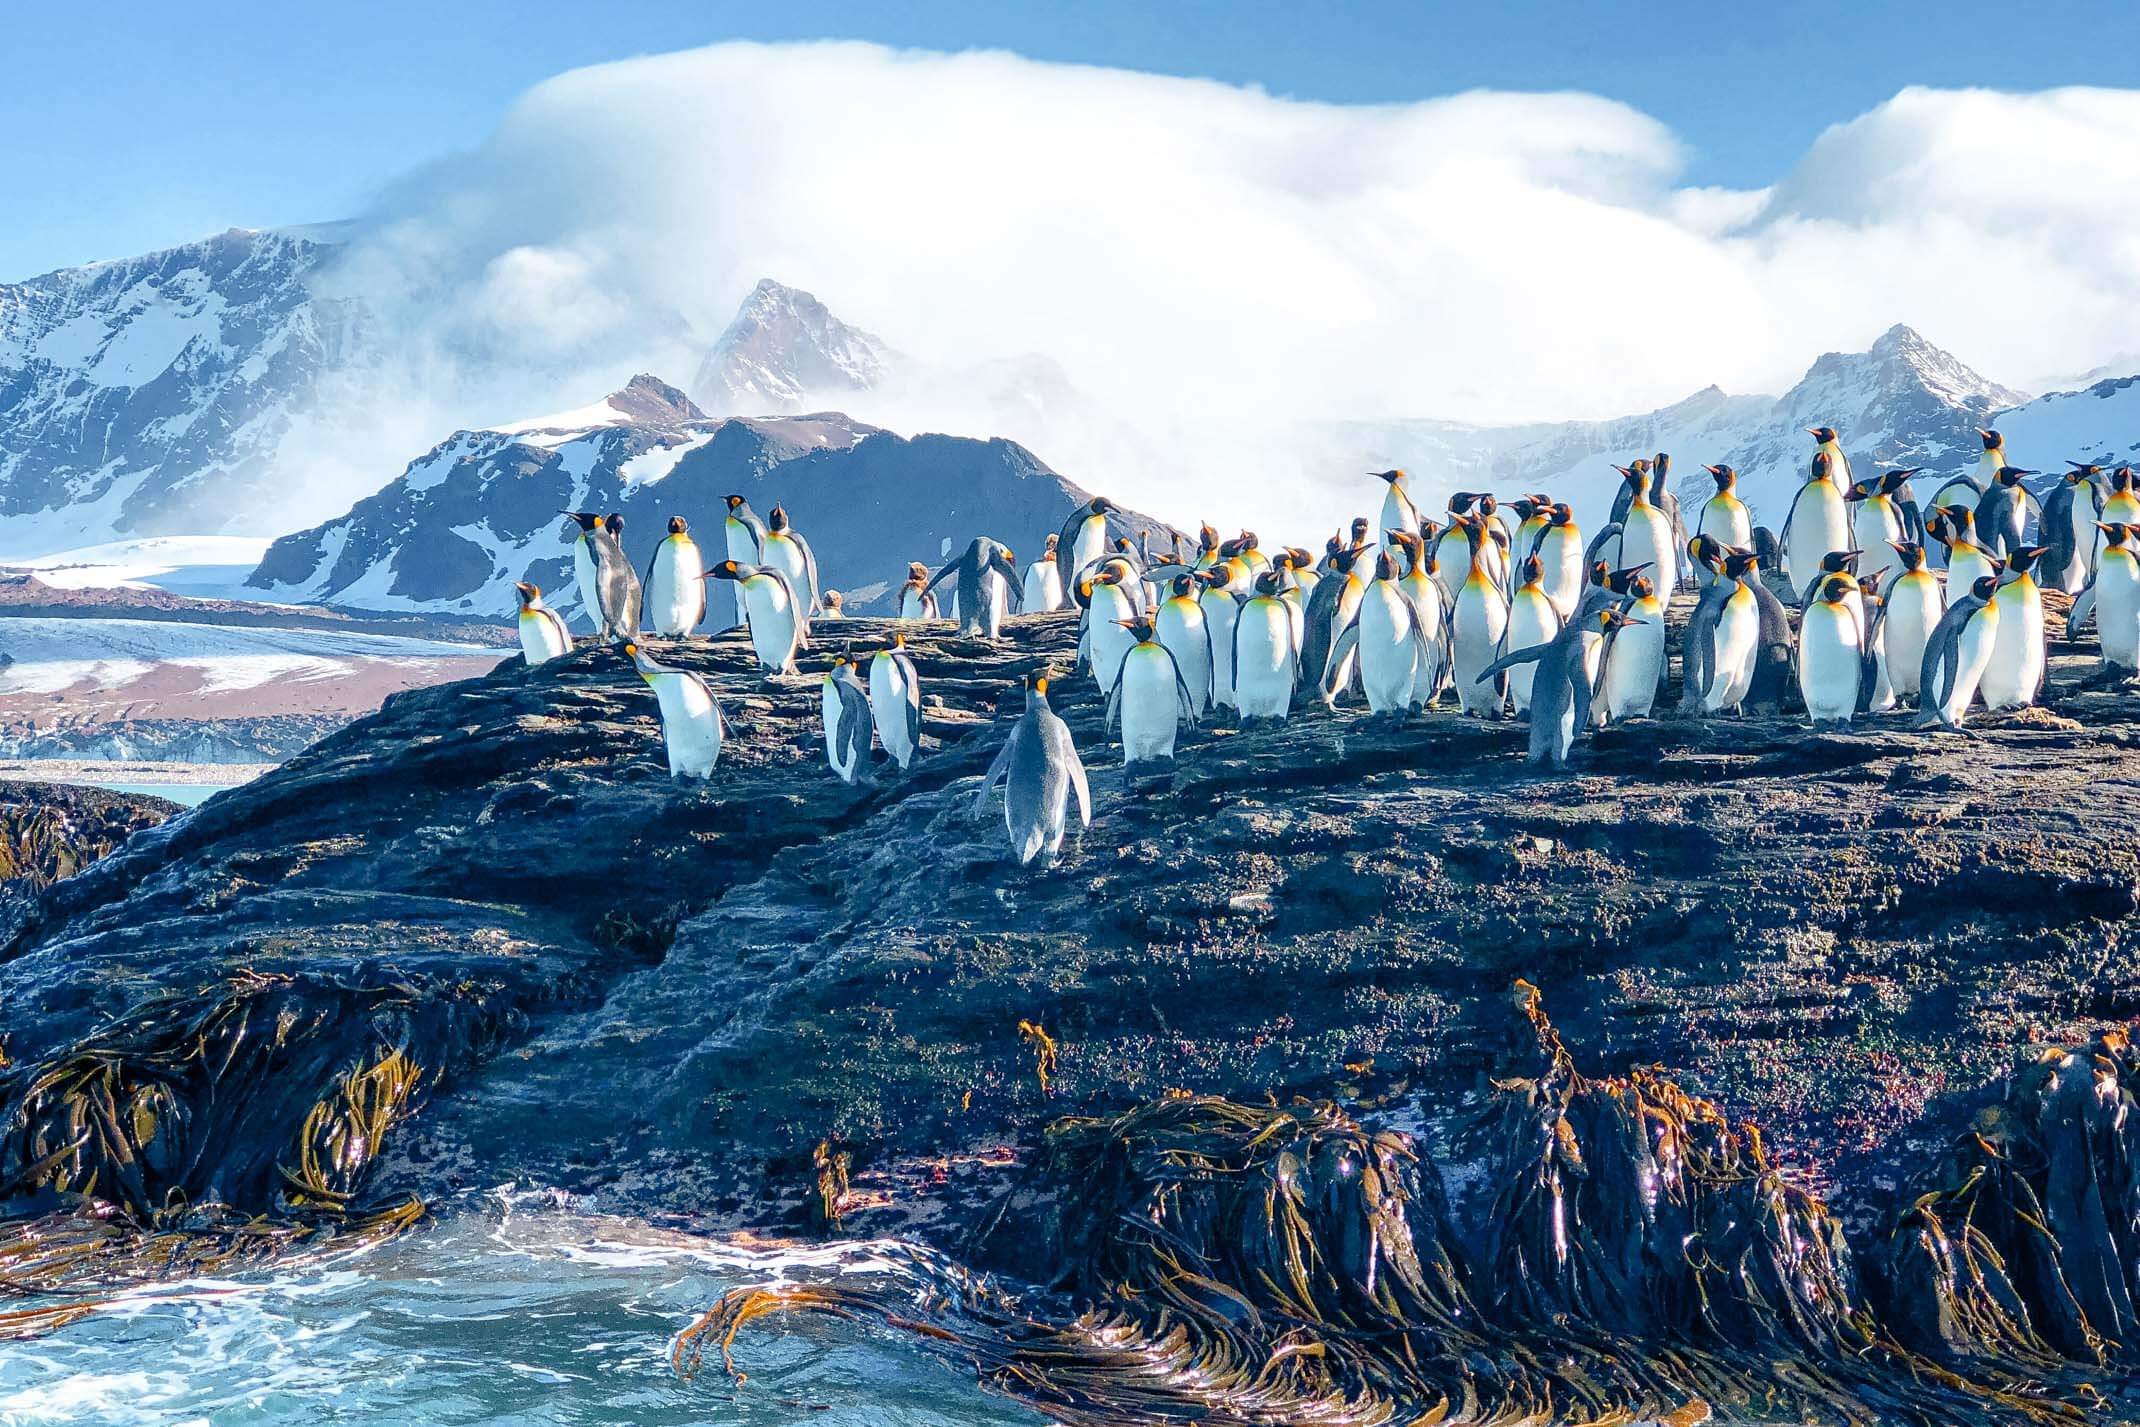 A complete guide to Antarctica